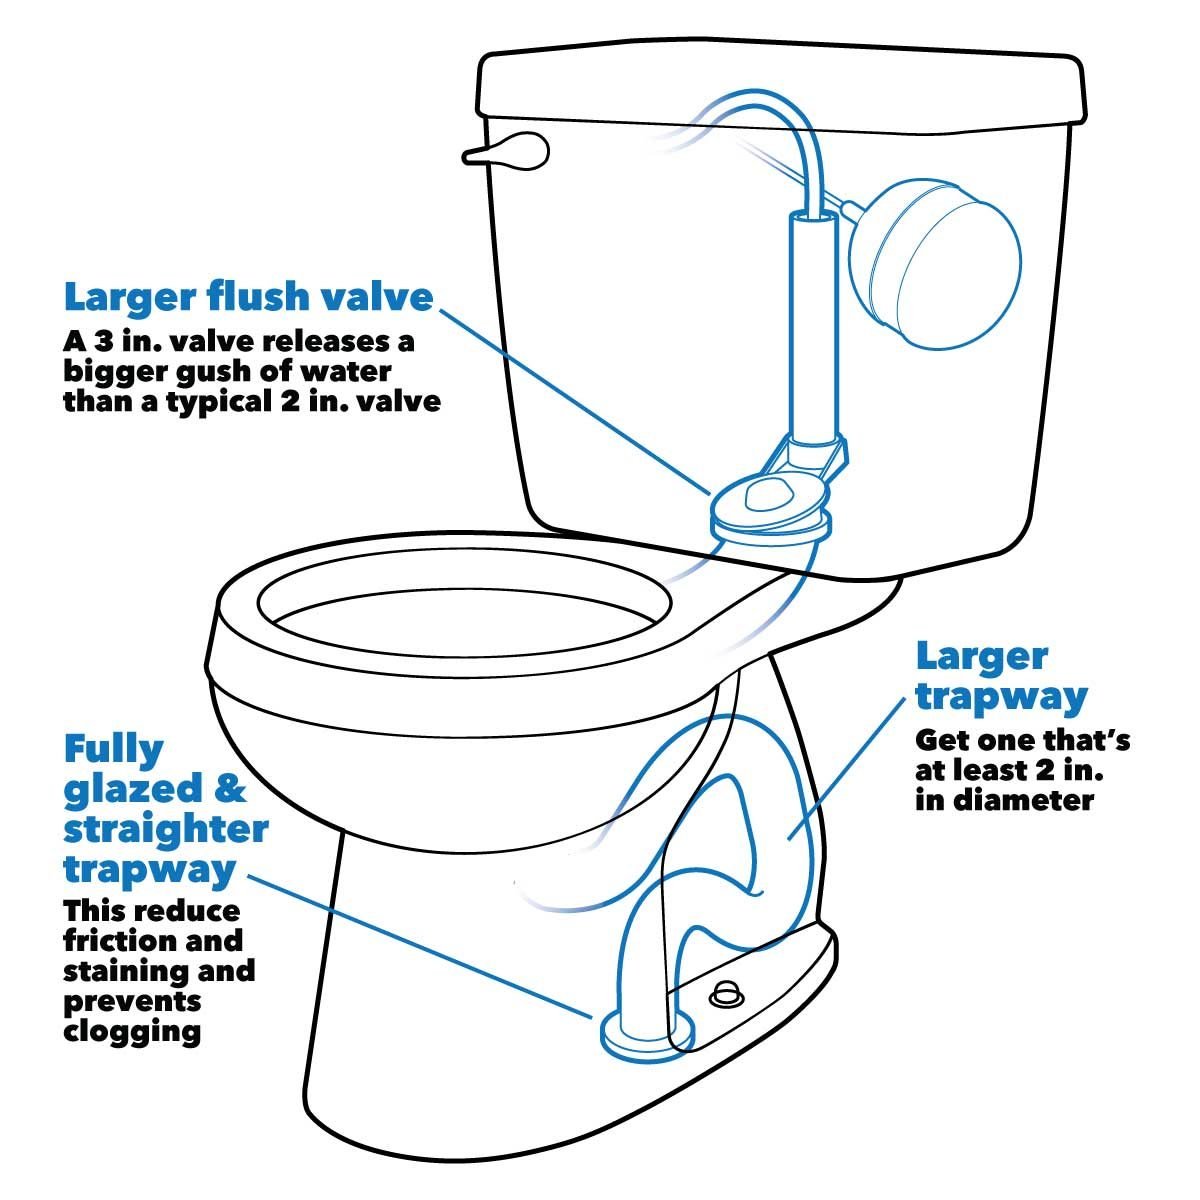 How to Buy a New Toilet for Your Home